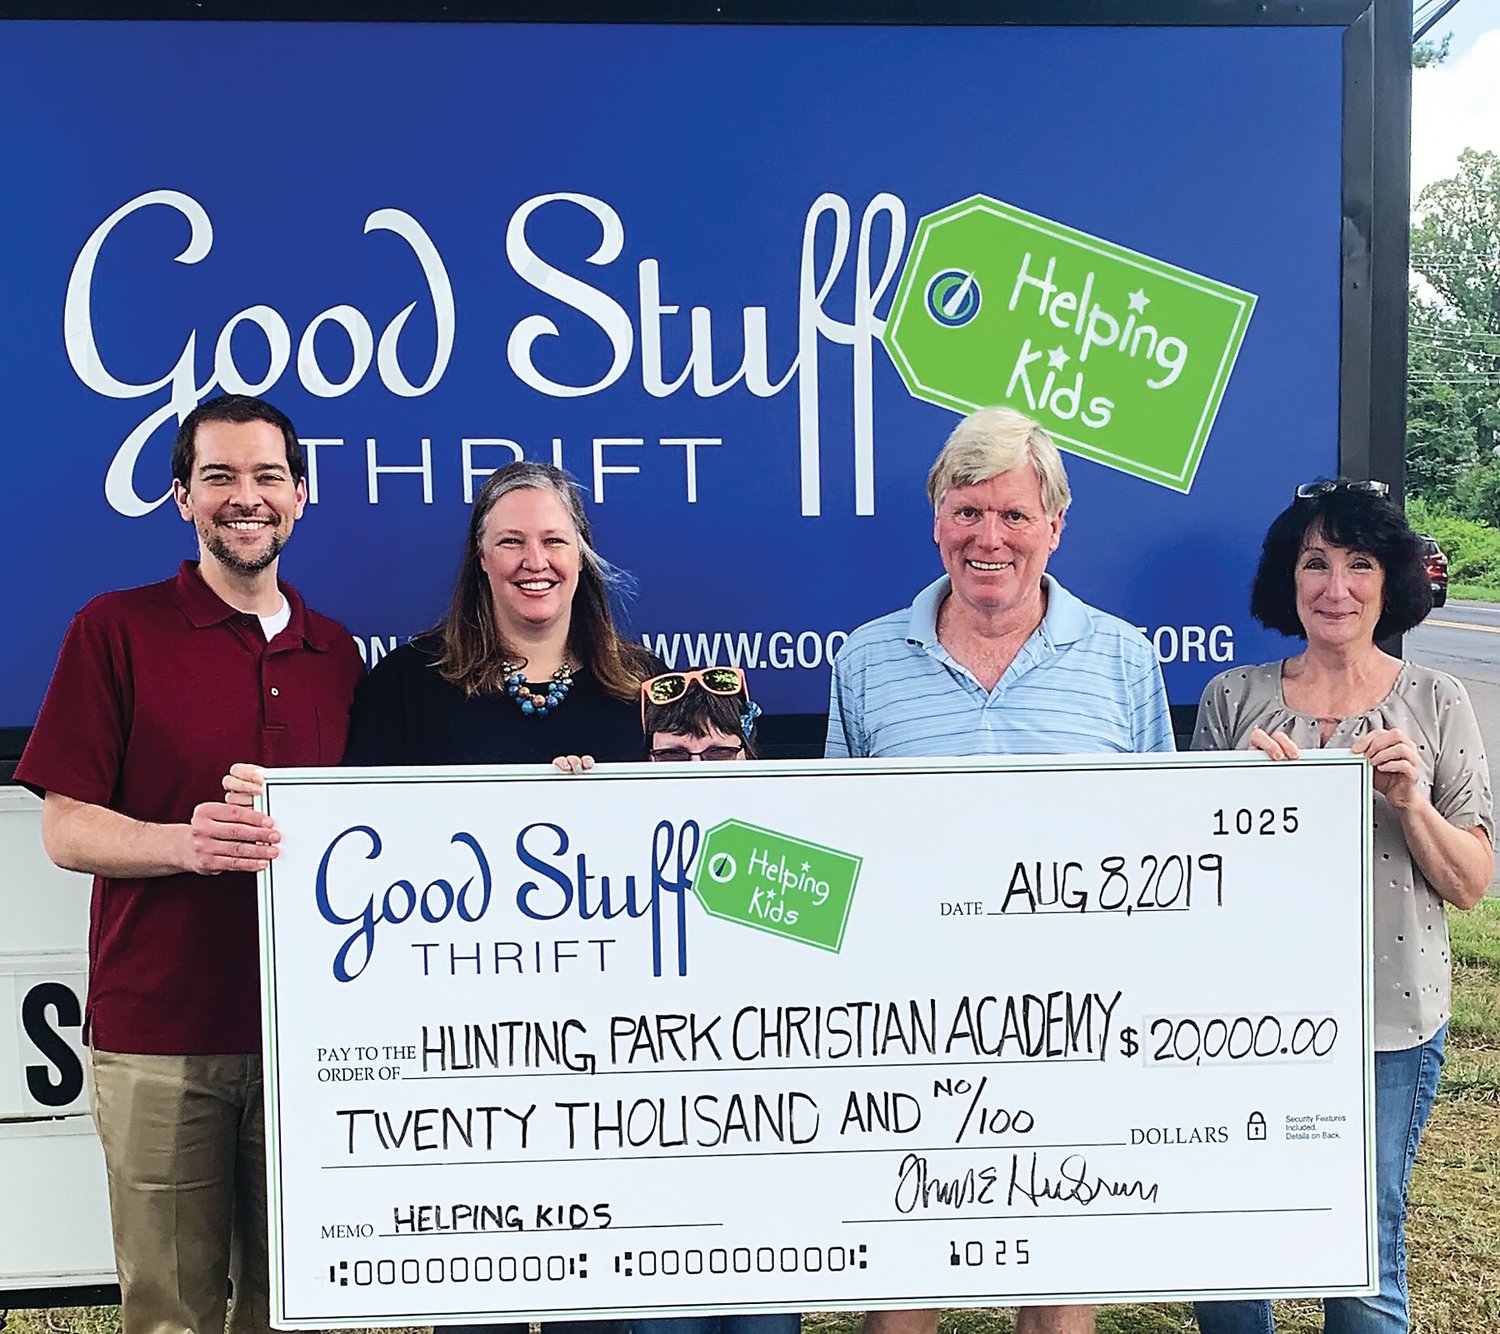 Kevin and Jen Deane of Hunting Park Christian Academy with Good Stuff CEO Ed Hudson and representatives from the Good Stuff Buckingham store.